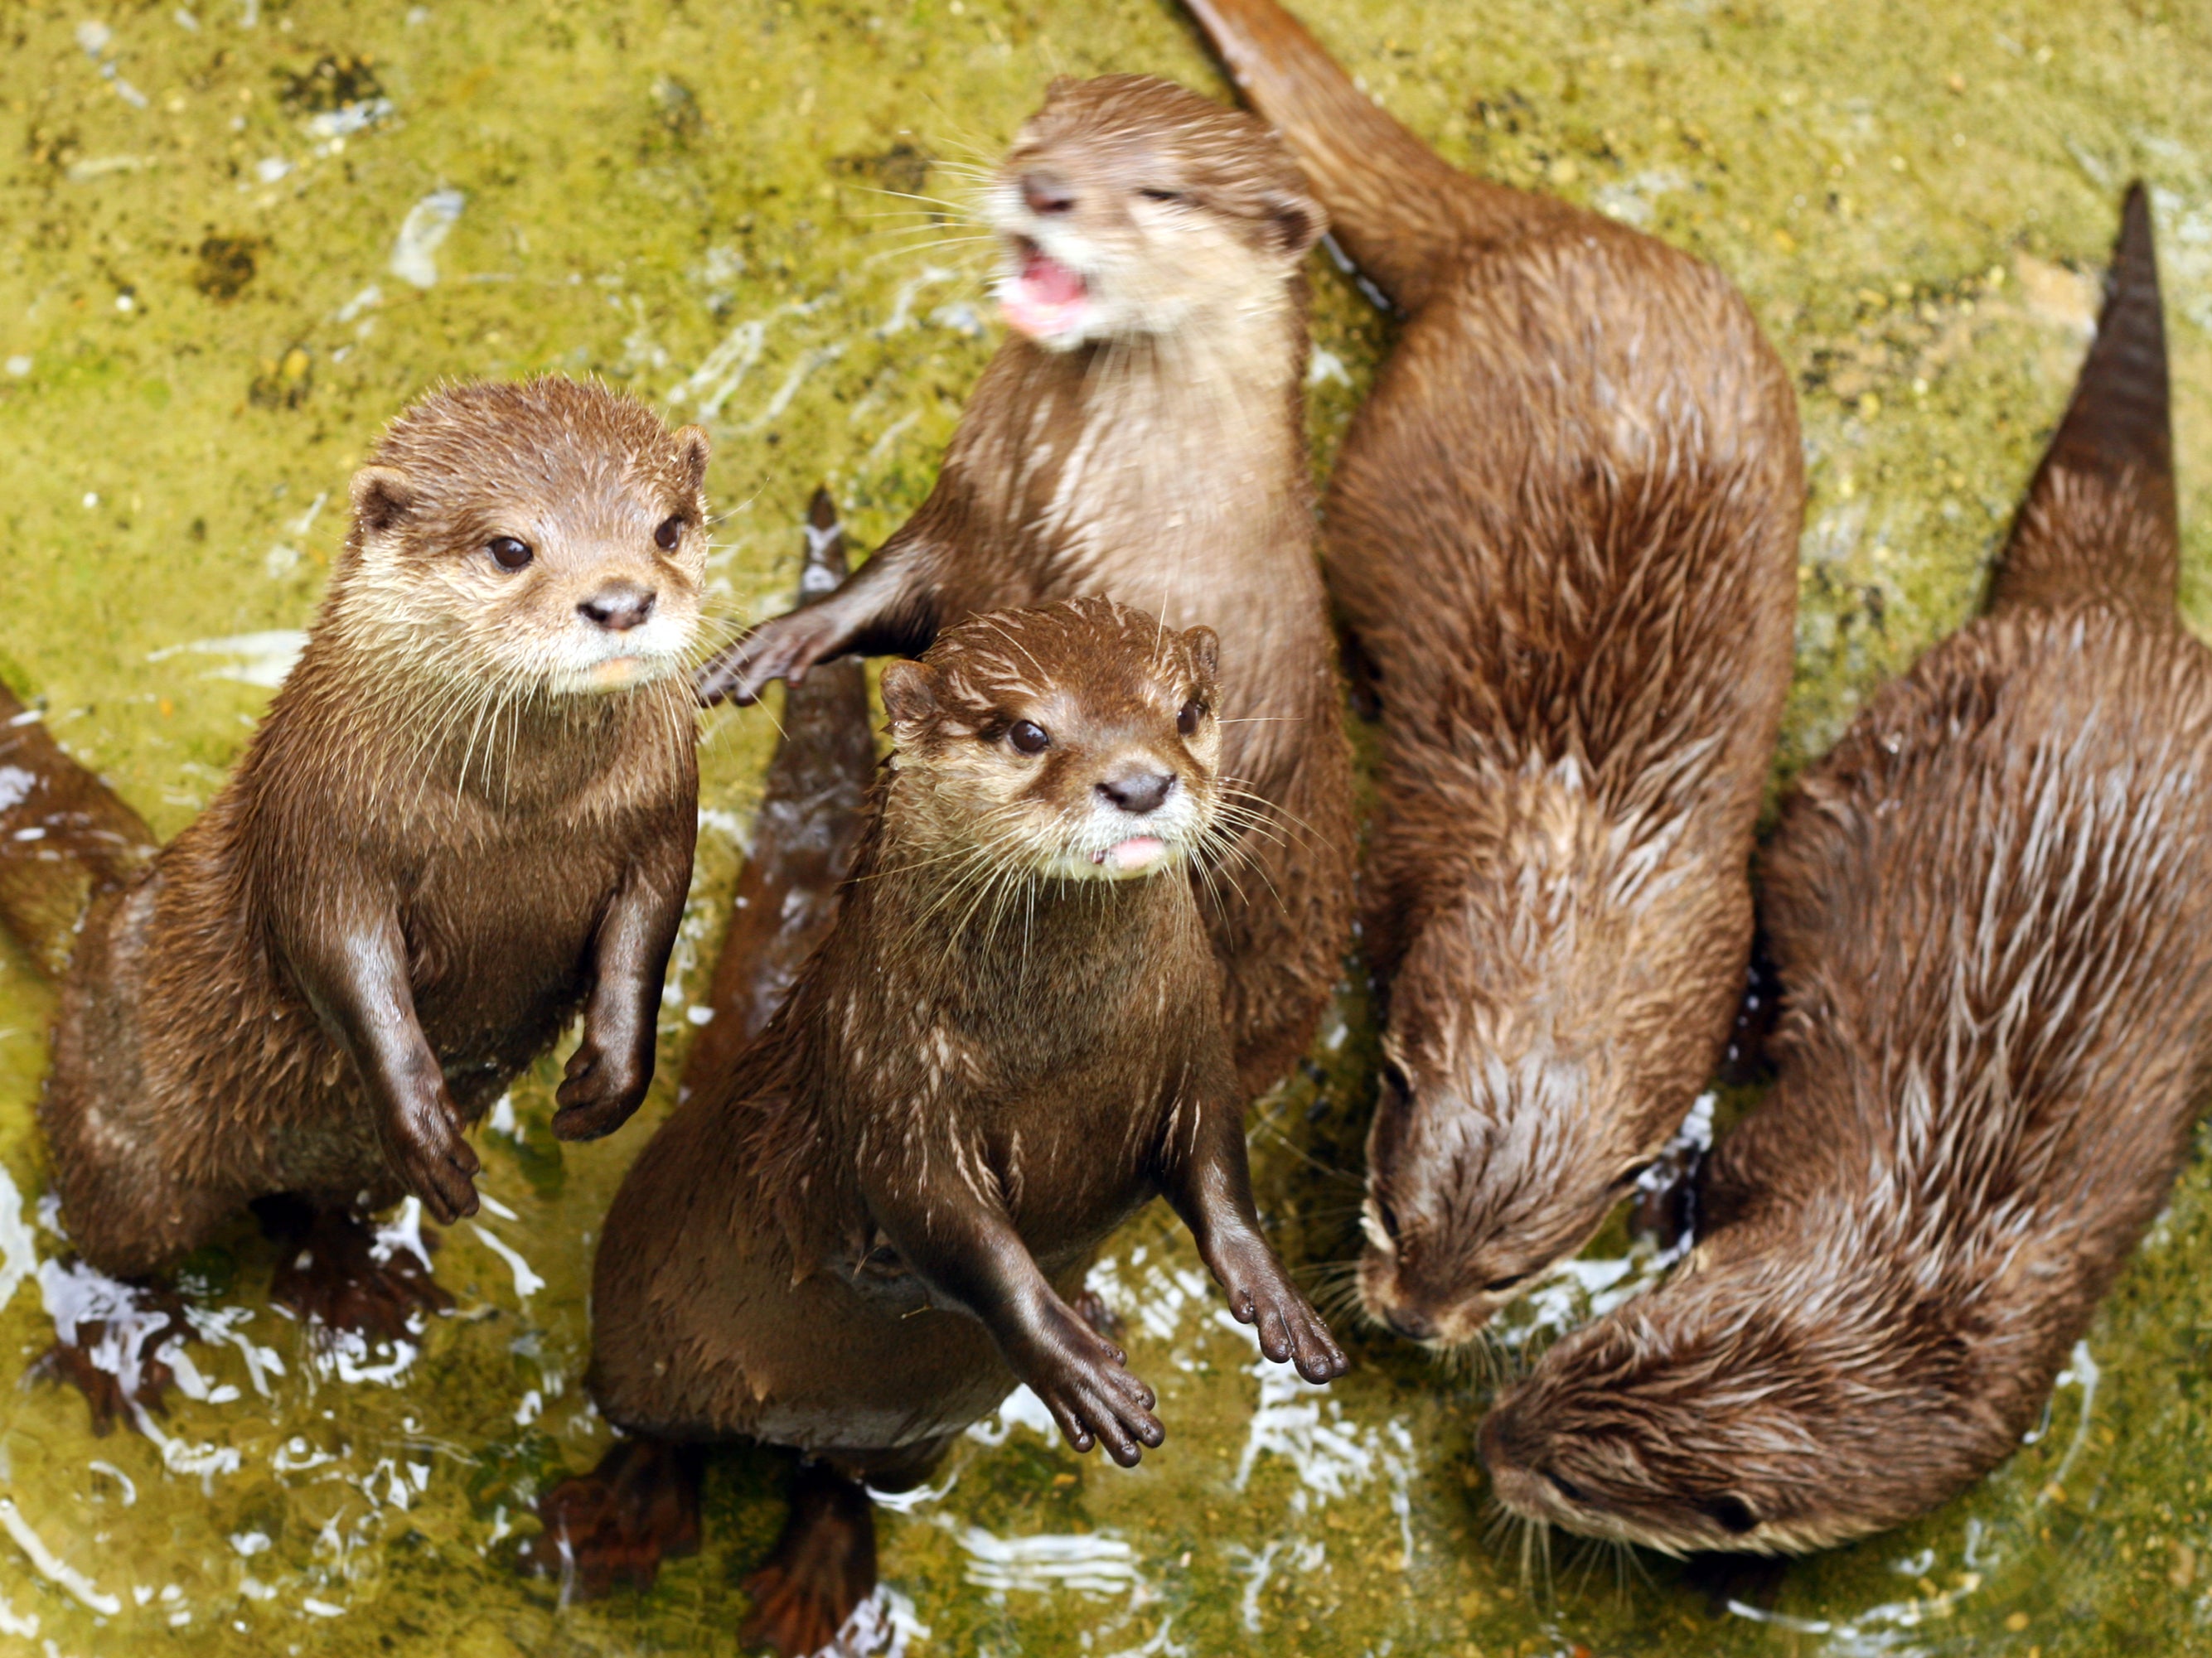 When one otter solved a puzzle, its ‘friends’ quickly figured it out too, researchers found